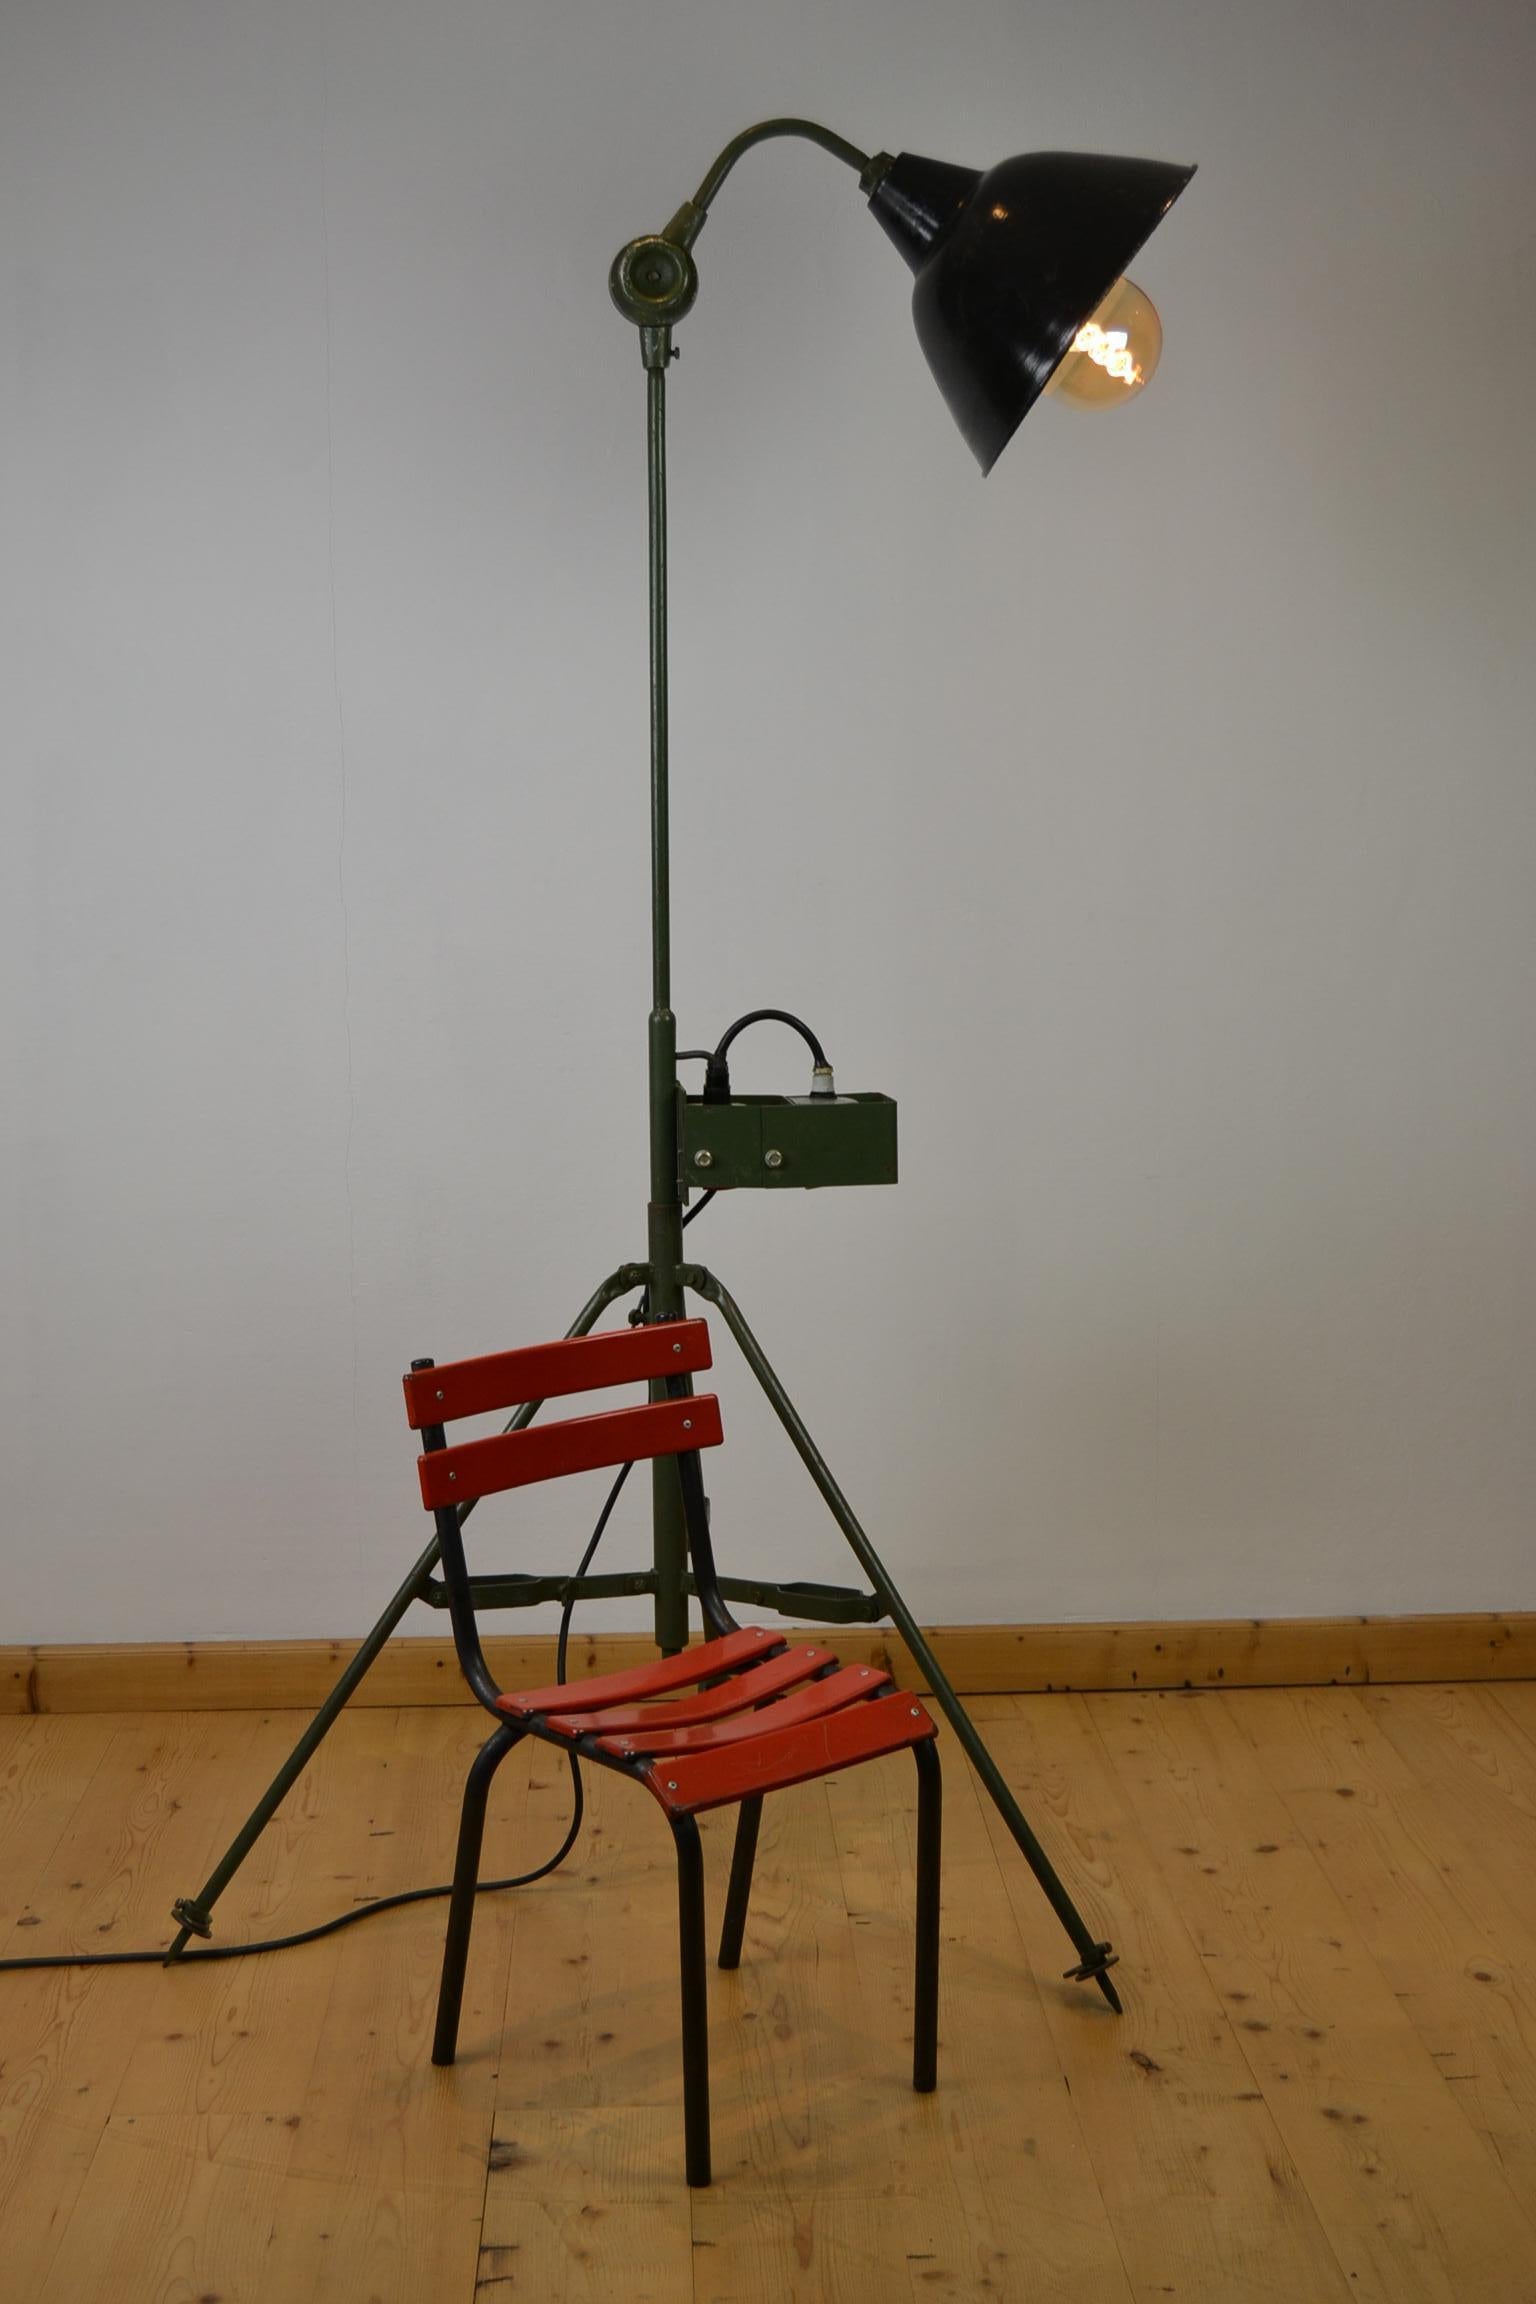 Large Military Spotlight - Lighting - industrial floor lamp.
This industrial style lighting has a base in the Army green color.
Its a green painted metal tripod base with on top a rod (which can be taken out ) with a black metal Shade. 

The shade